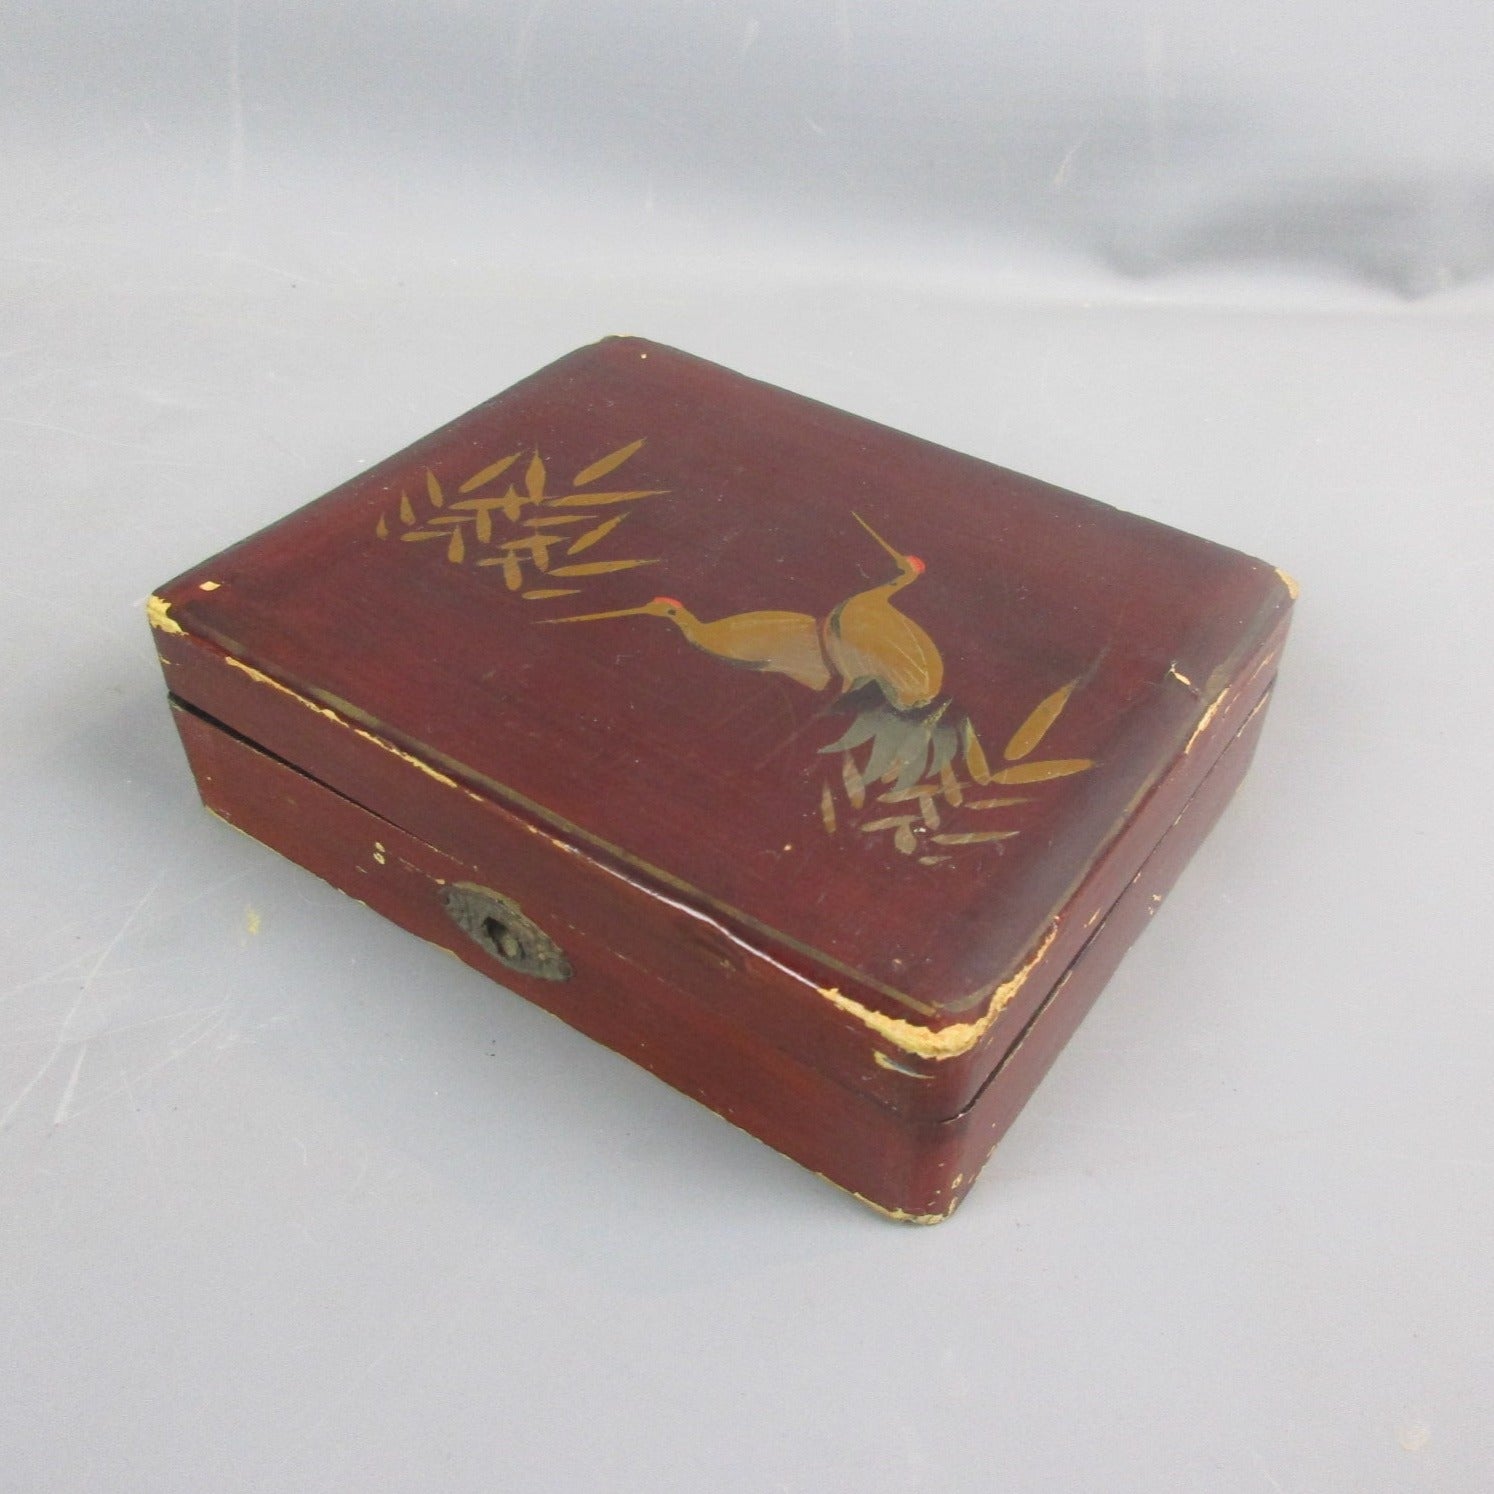 Lacquer Wood Chinese Heron Design Box Antique c1900